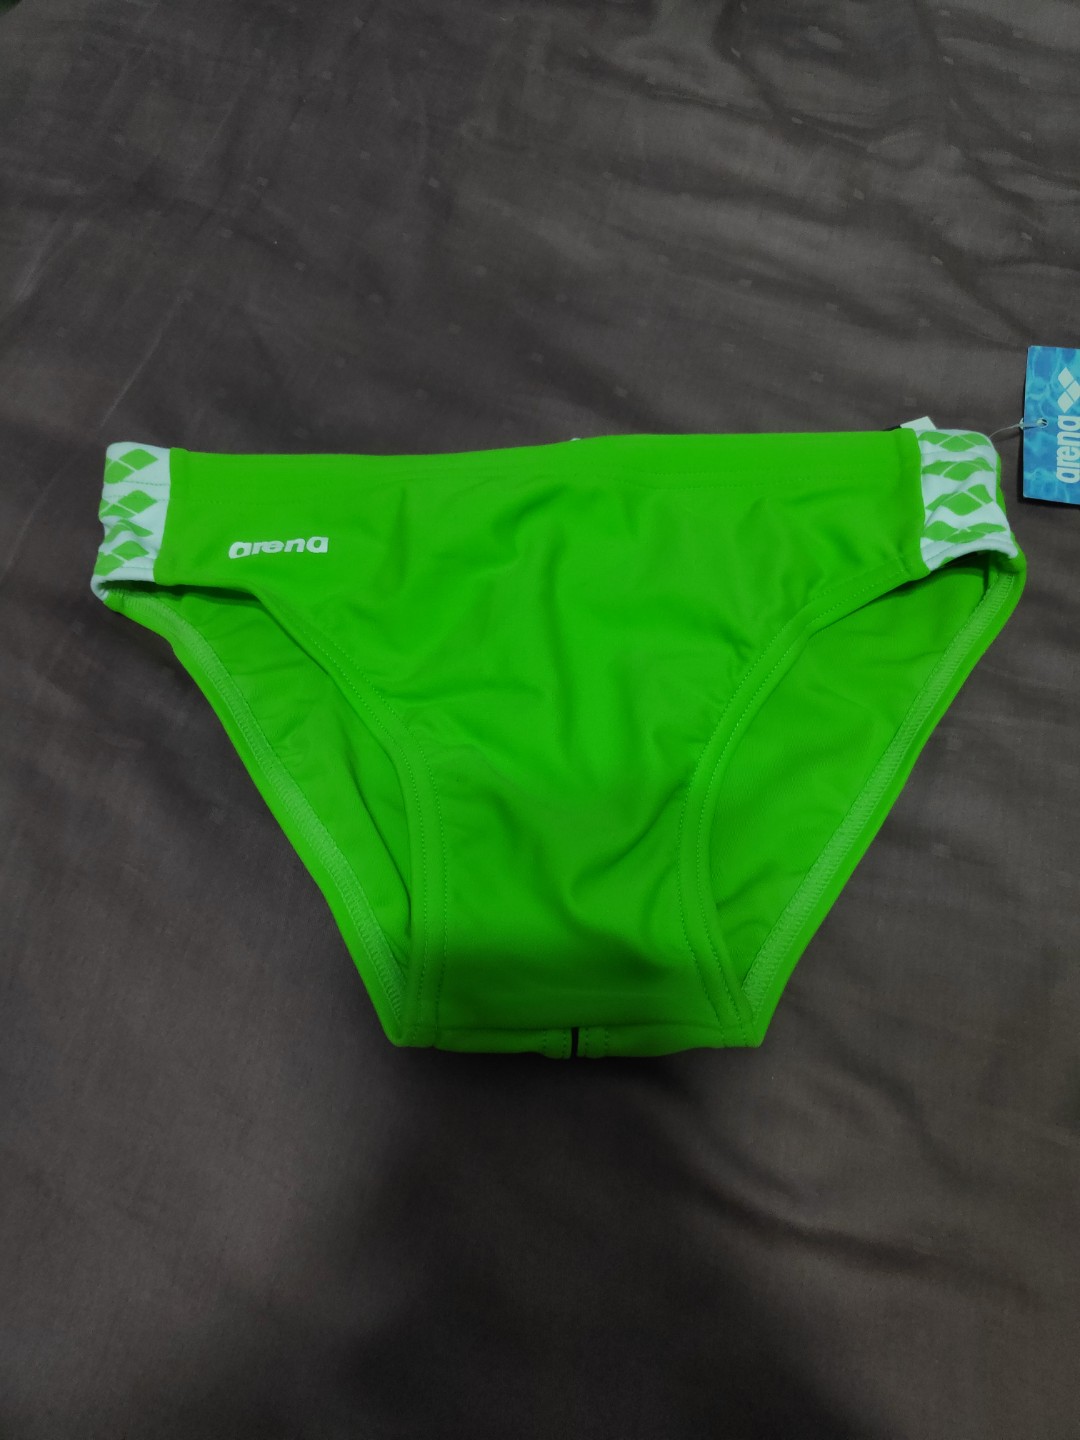  Arena  Swim  Trunks  Men s Fashion Clothes Others on Carousell